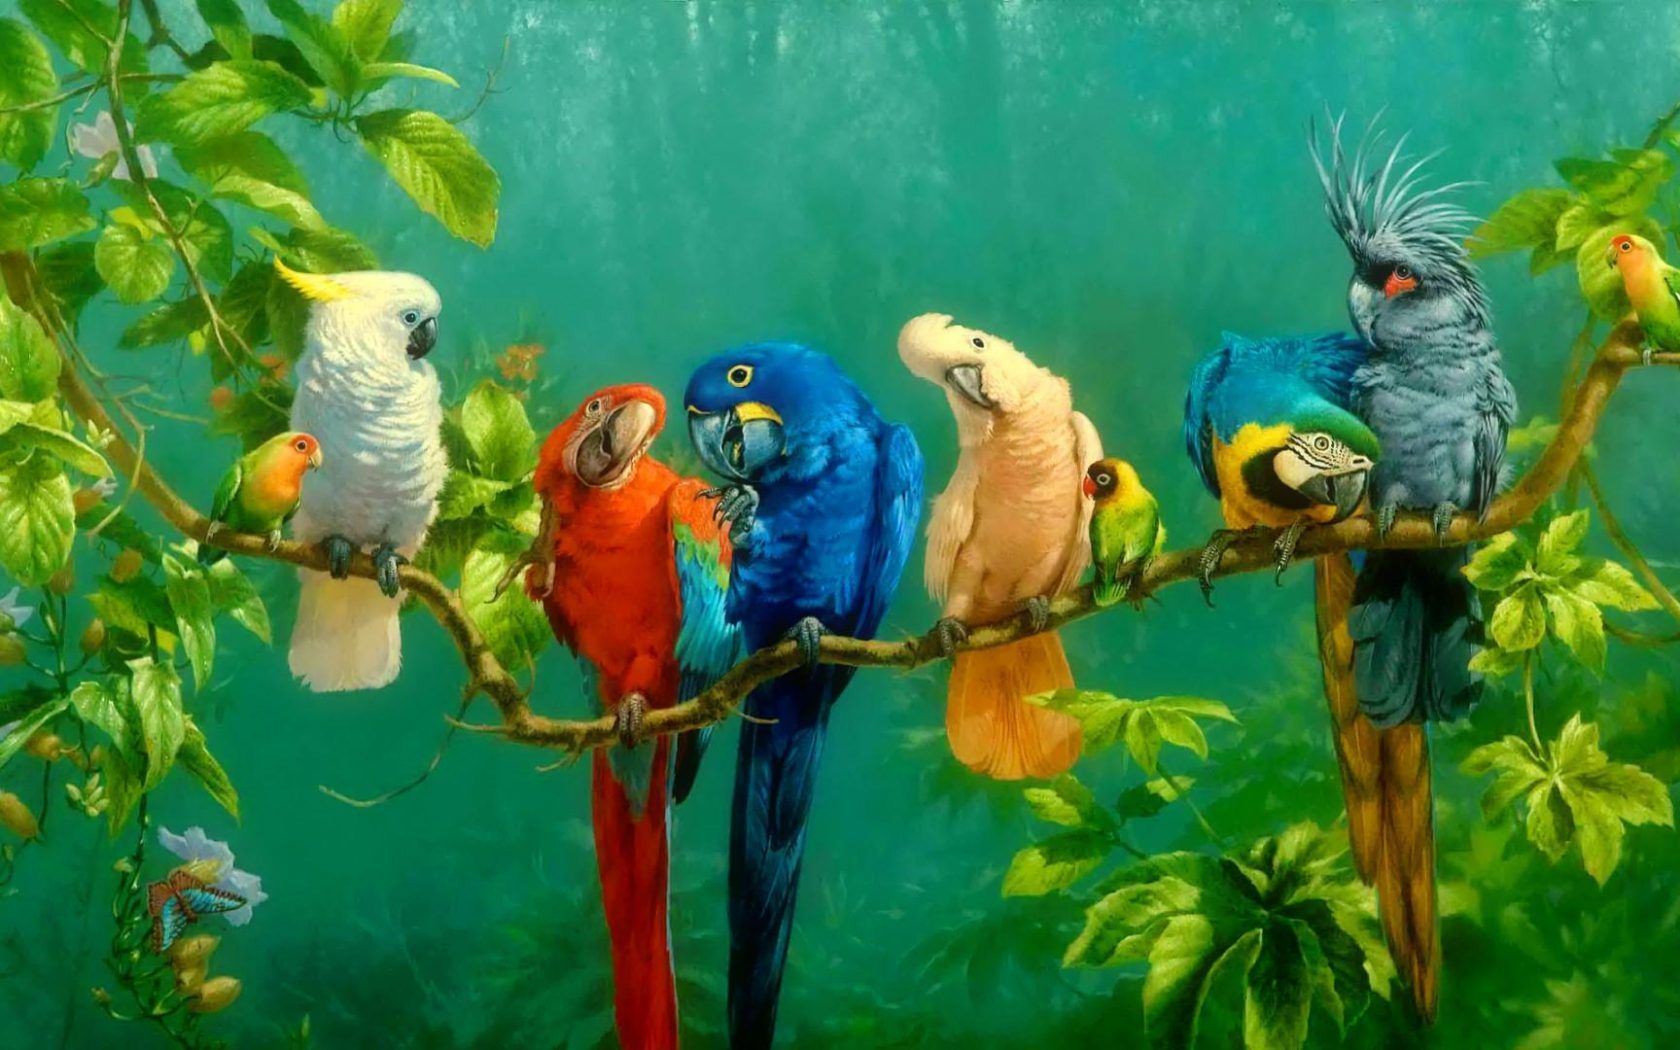 Parrot Colorful Birds On Branch Red Yellow Blue White Macaw Parrot Wallpaper HD 1920x1080, Wallpaper13.com